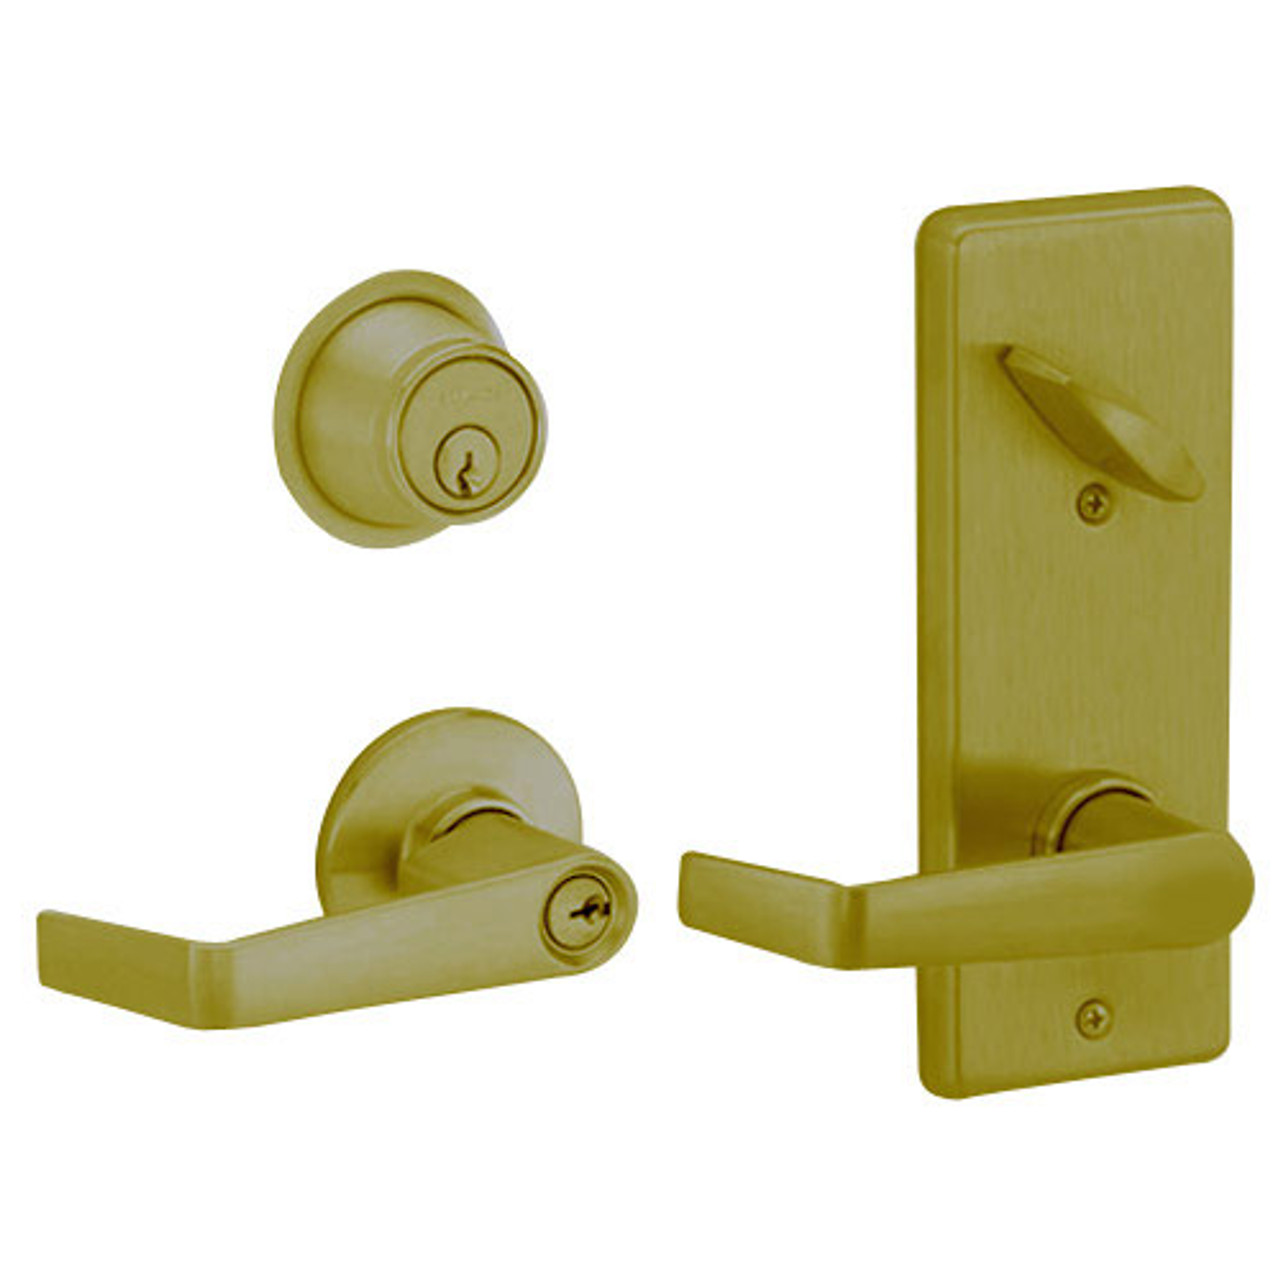 S280PD-SAT-609 Schlage S280PD Saturn Style Interconnected Lock in Antique Brass